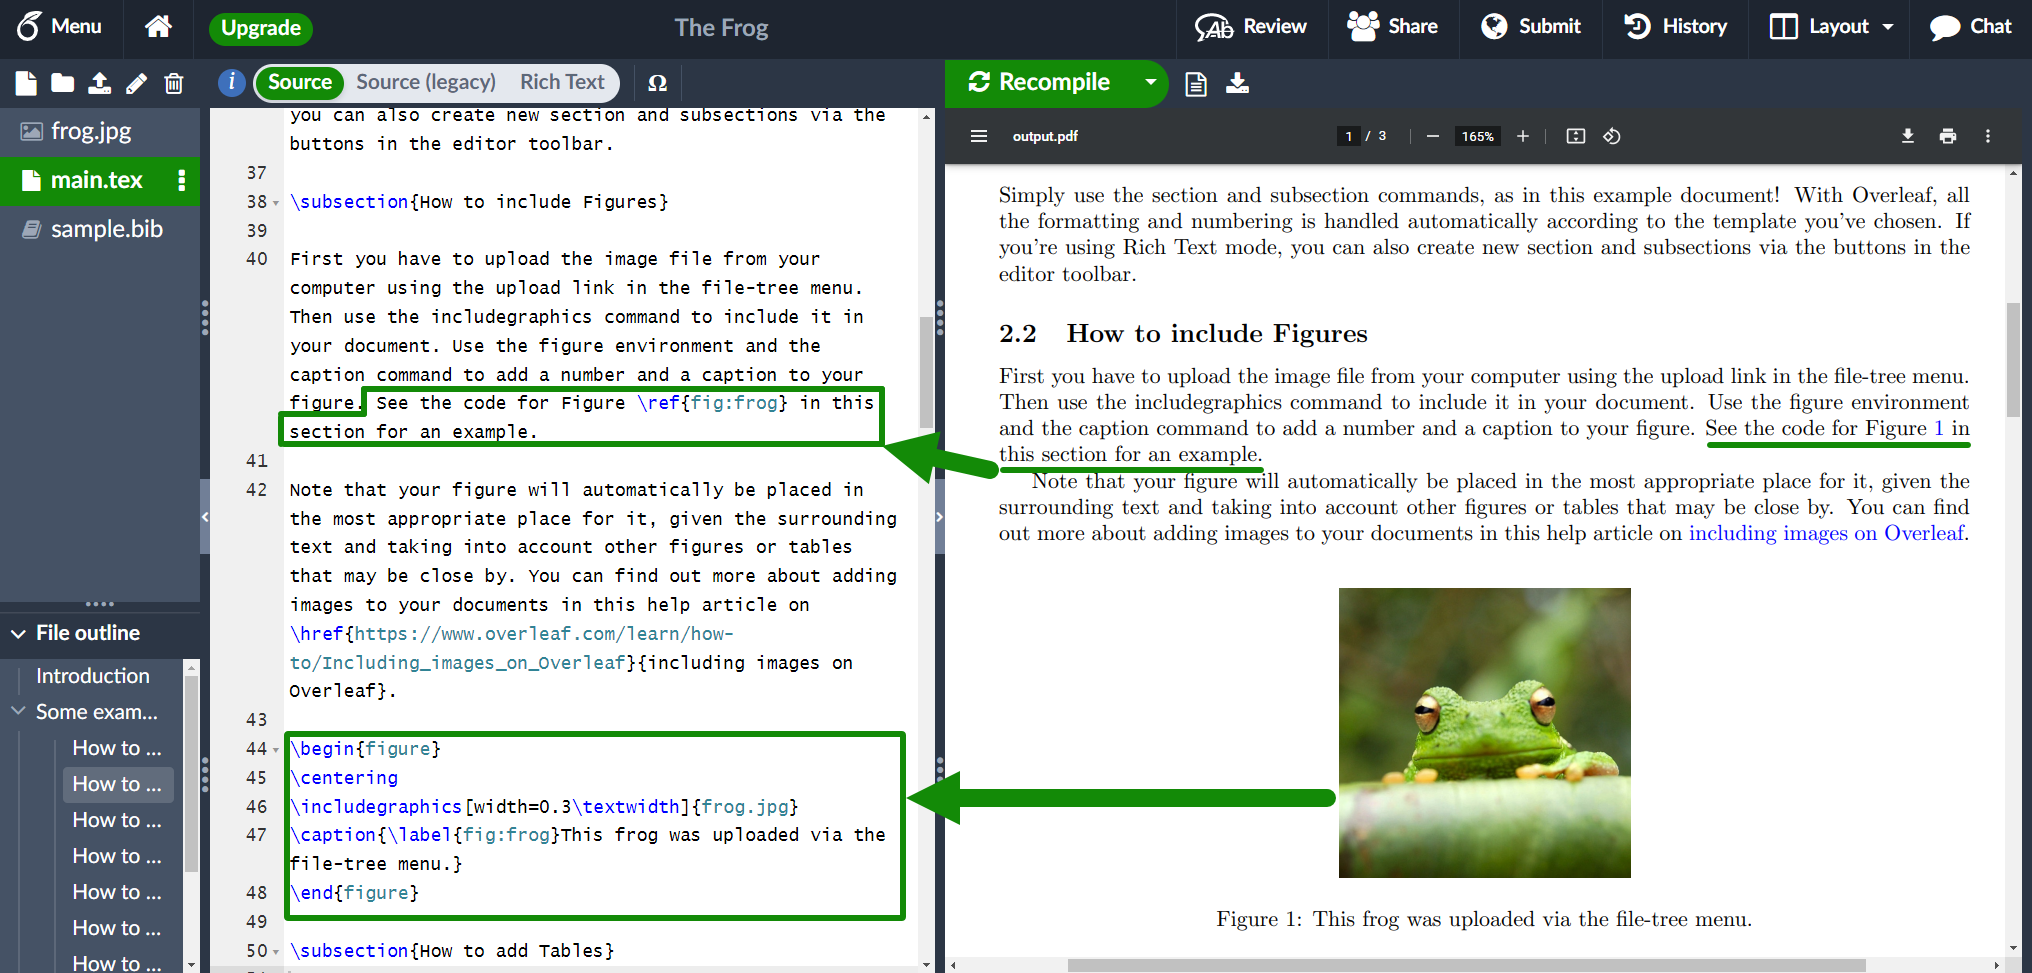 How to delete the frog image from the Example Overleaf Project